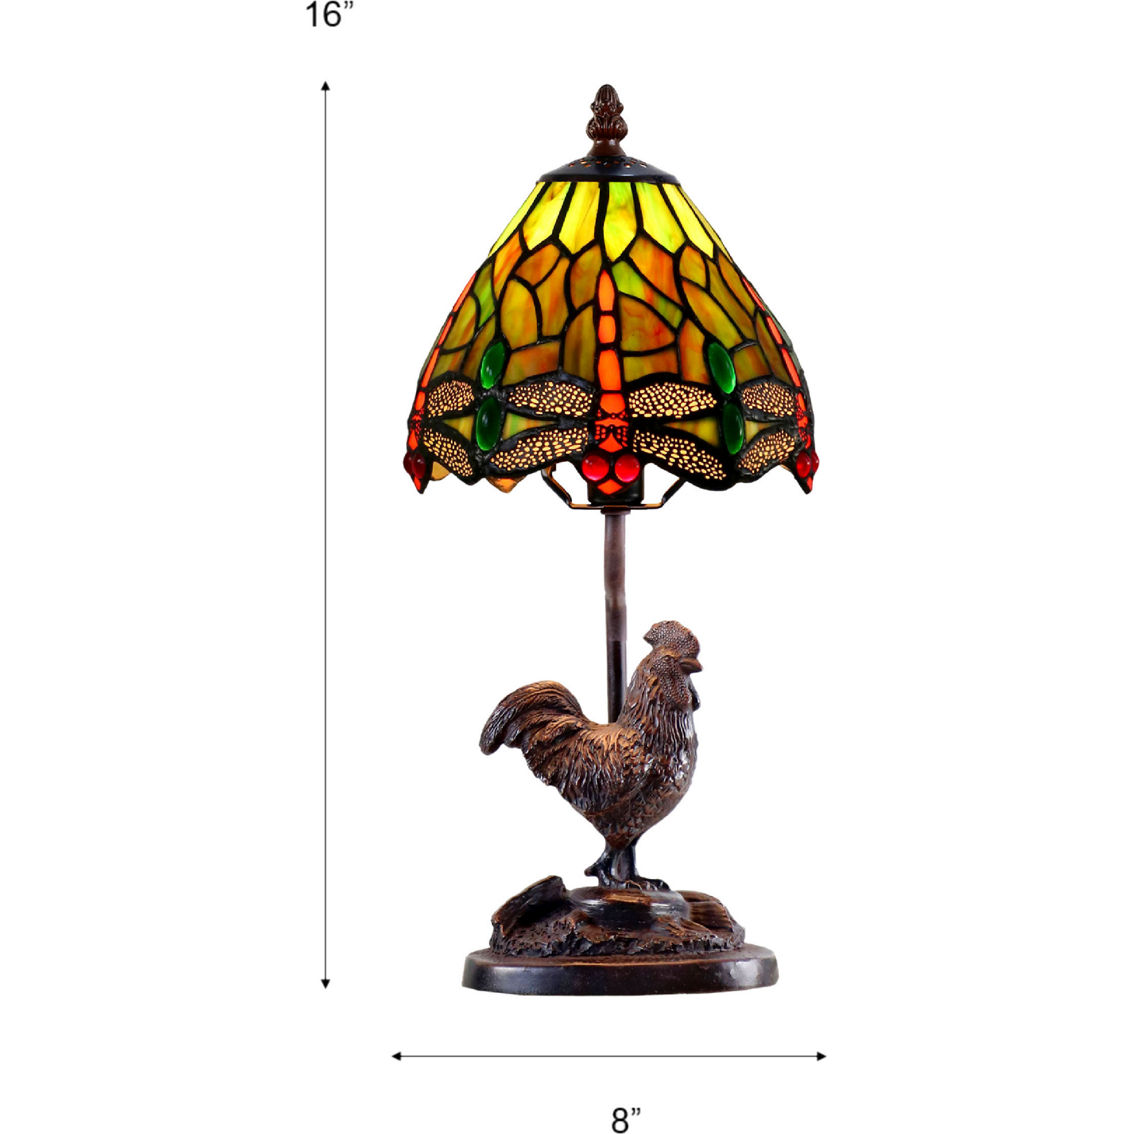 Dale Tiffany 16 in. Tall Rooster Sculpture Accent Lamp - Image 3 of 4